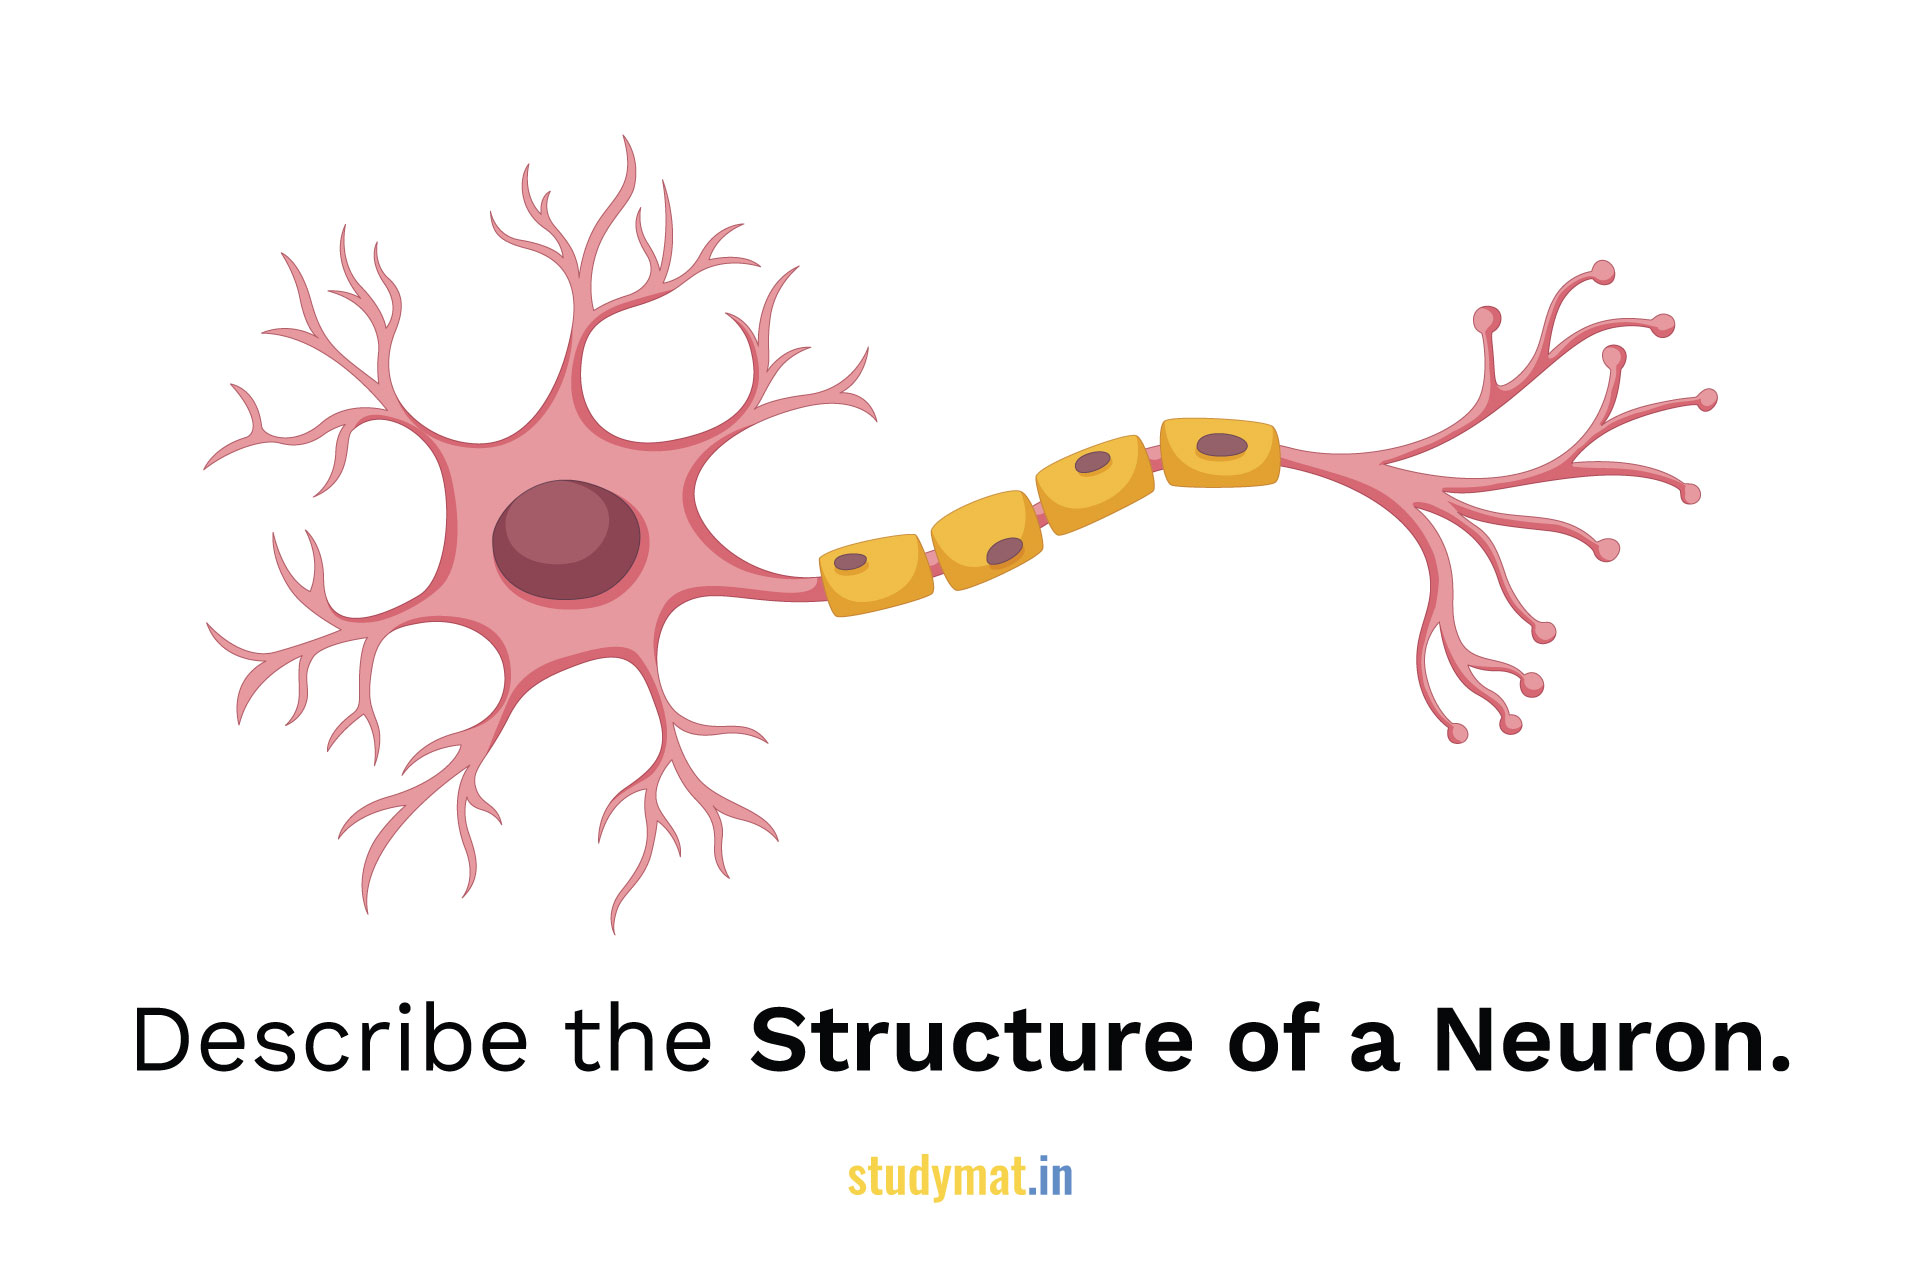 Structure-of-a-Neuron-studymat.in